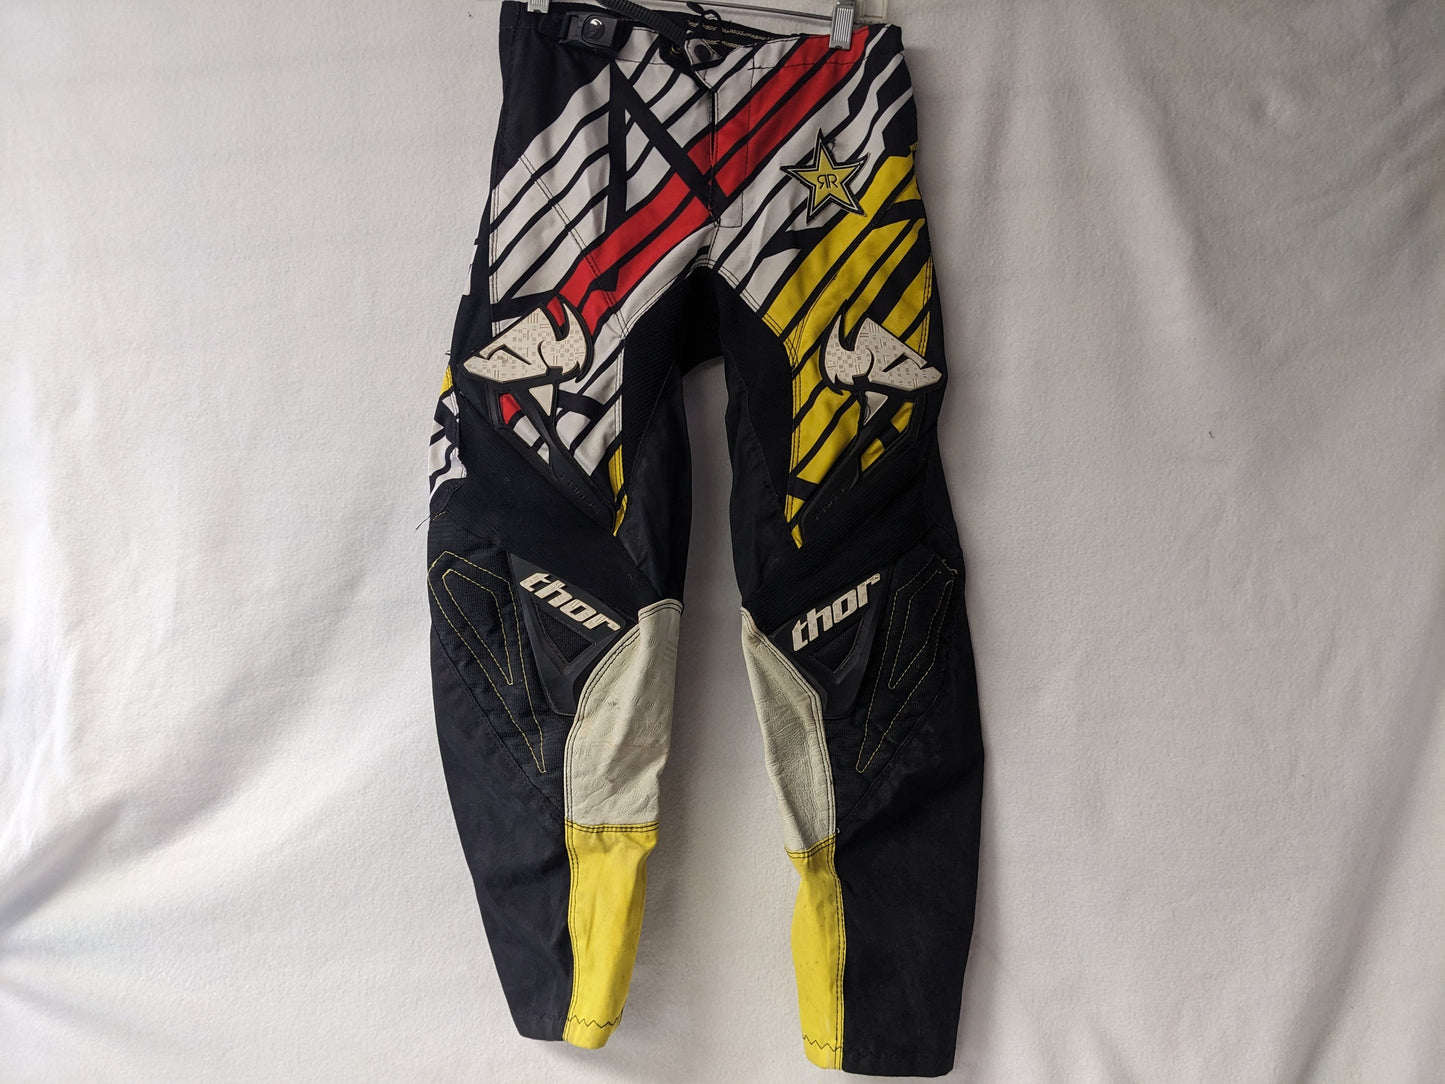 Thor Rock Star Youth MX Motocross Racing Pants No Hip Pads Size Youth Color Black Condition Used